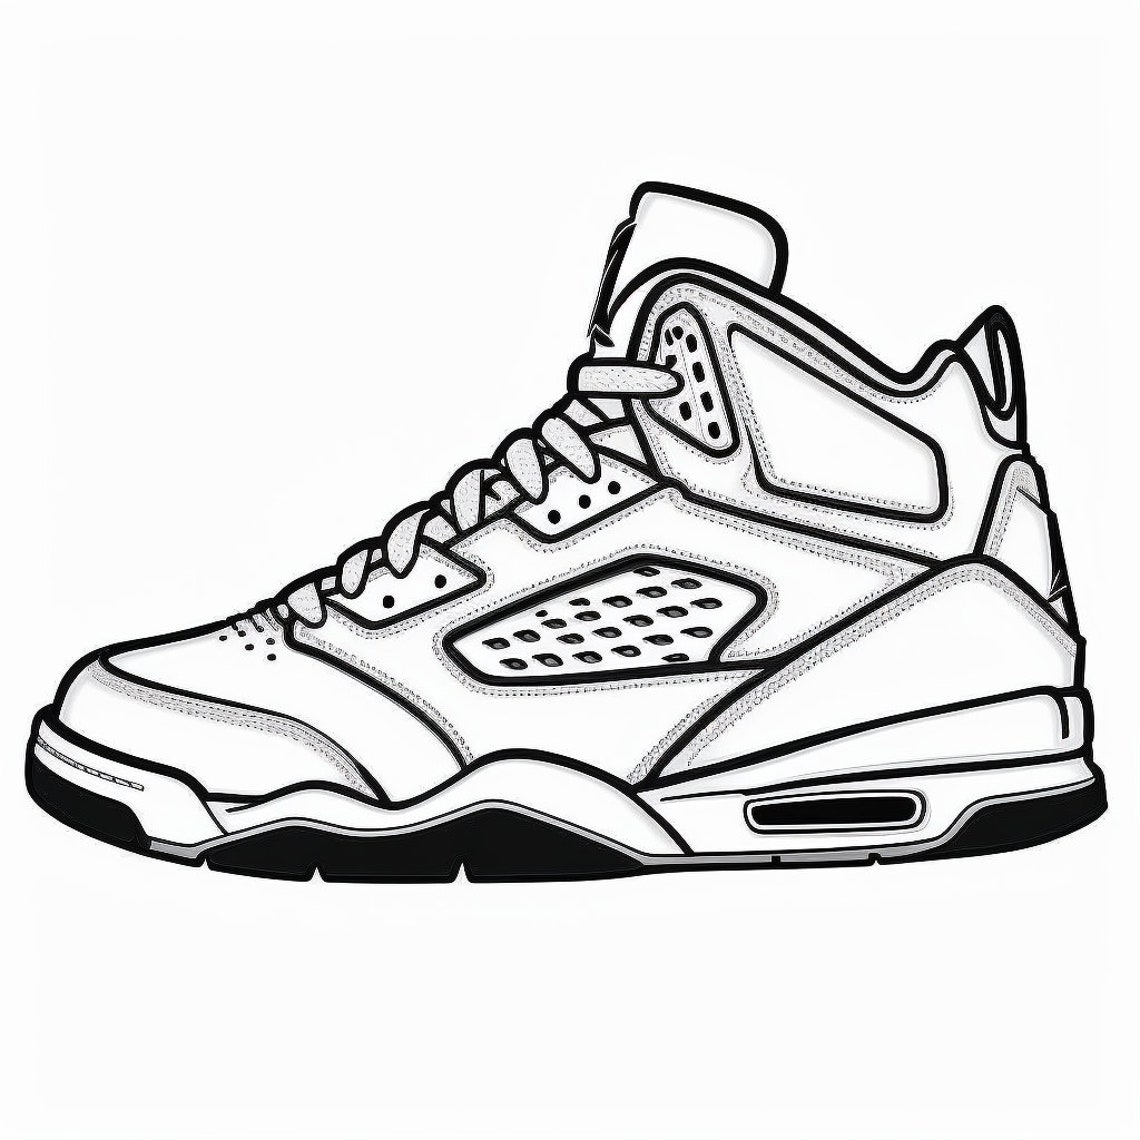 25 Printable Coloring Pages of Sneakers for Shoe Lovers Nike, Adidas ...